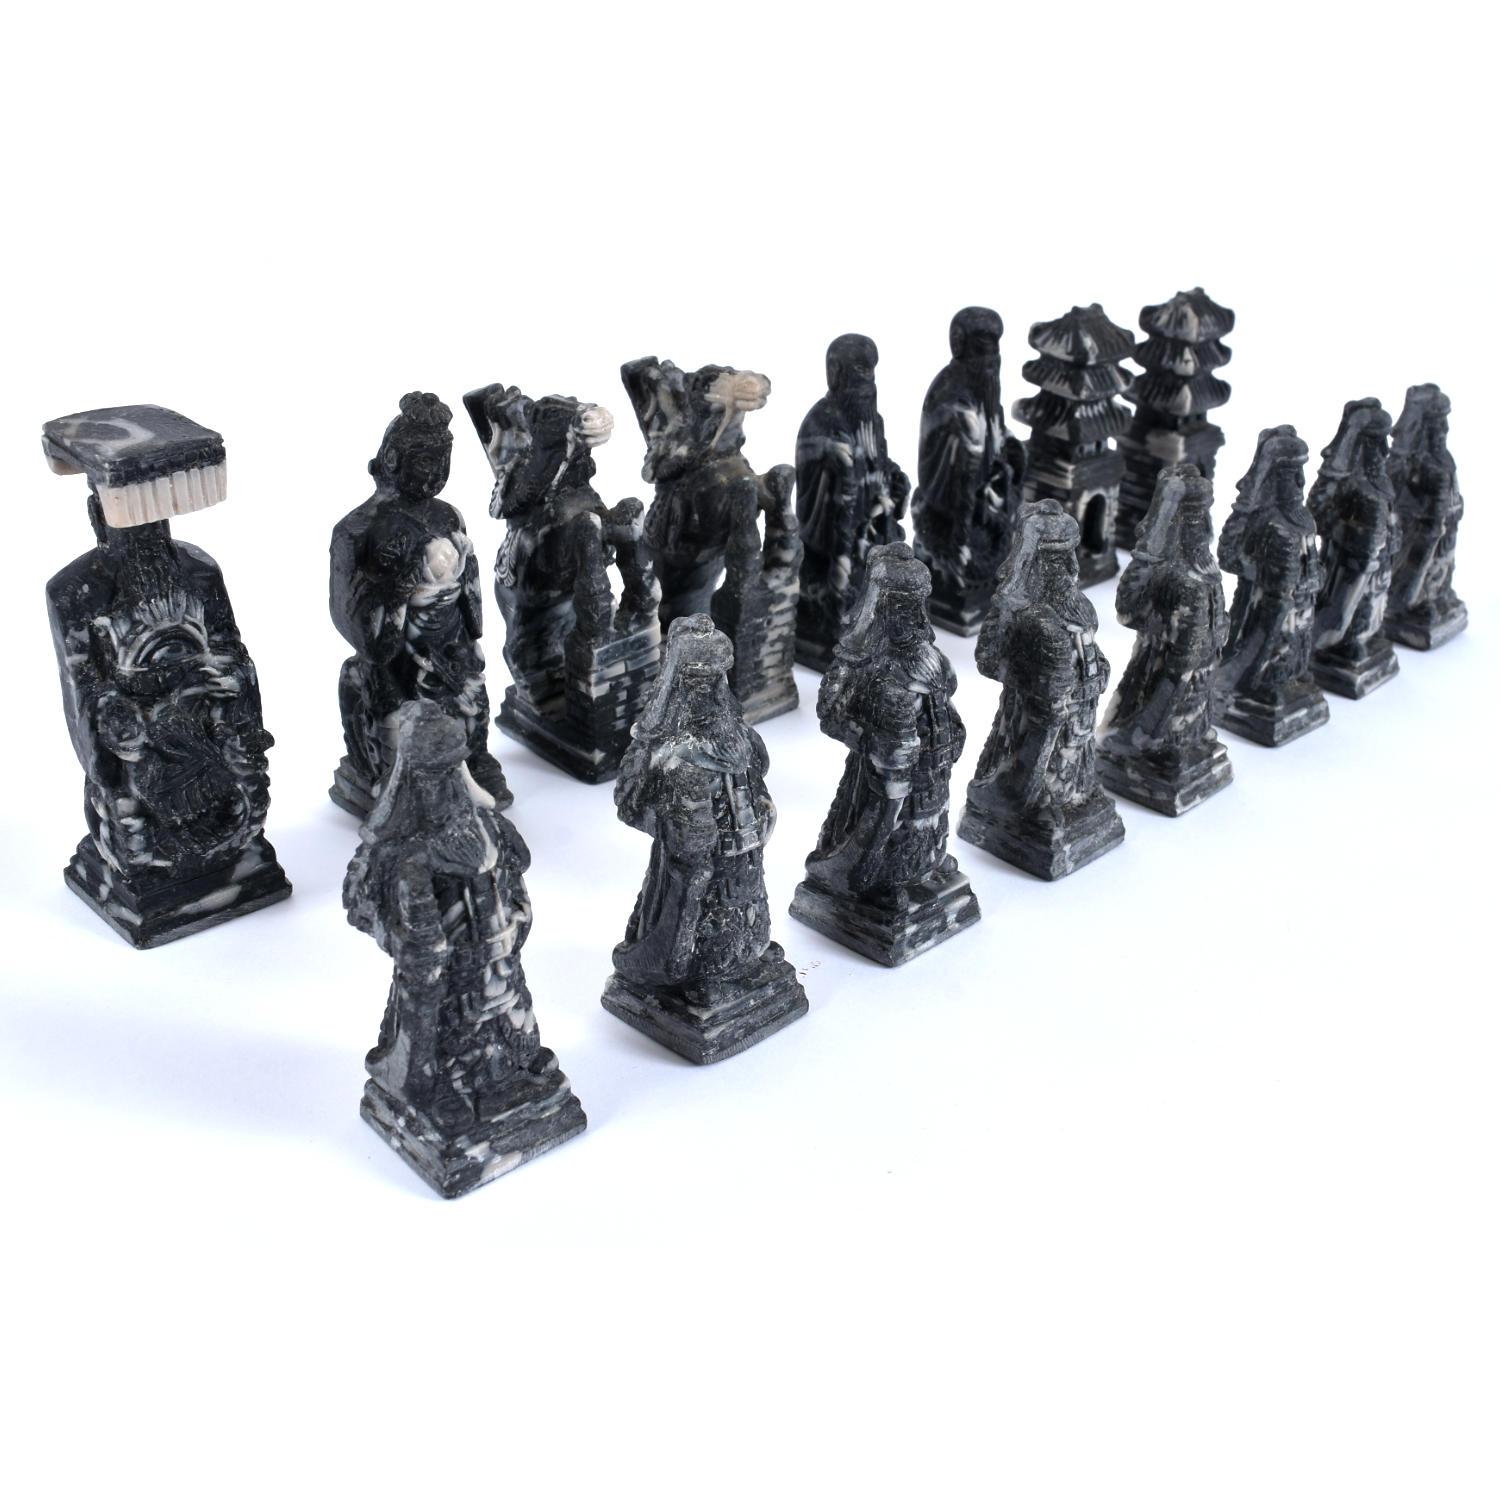 Black and White Marbled Stone Resin Carved Chinese Chess Set 1